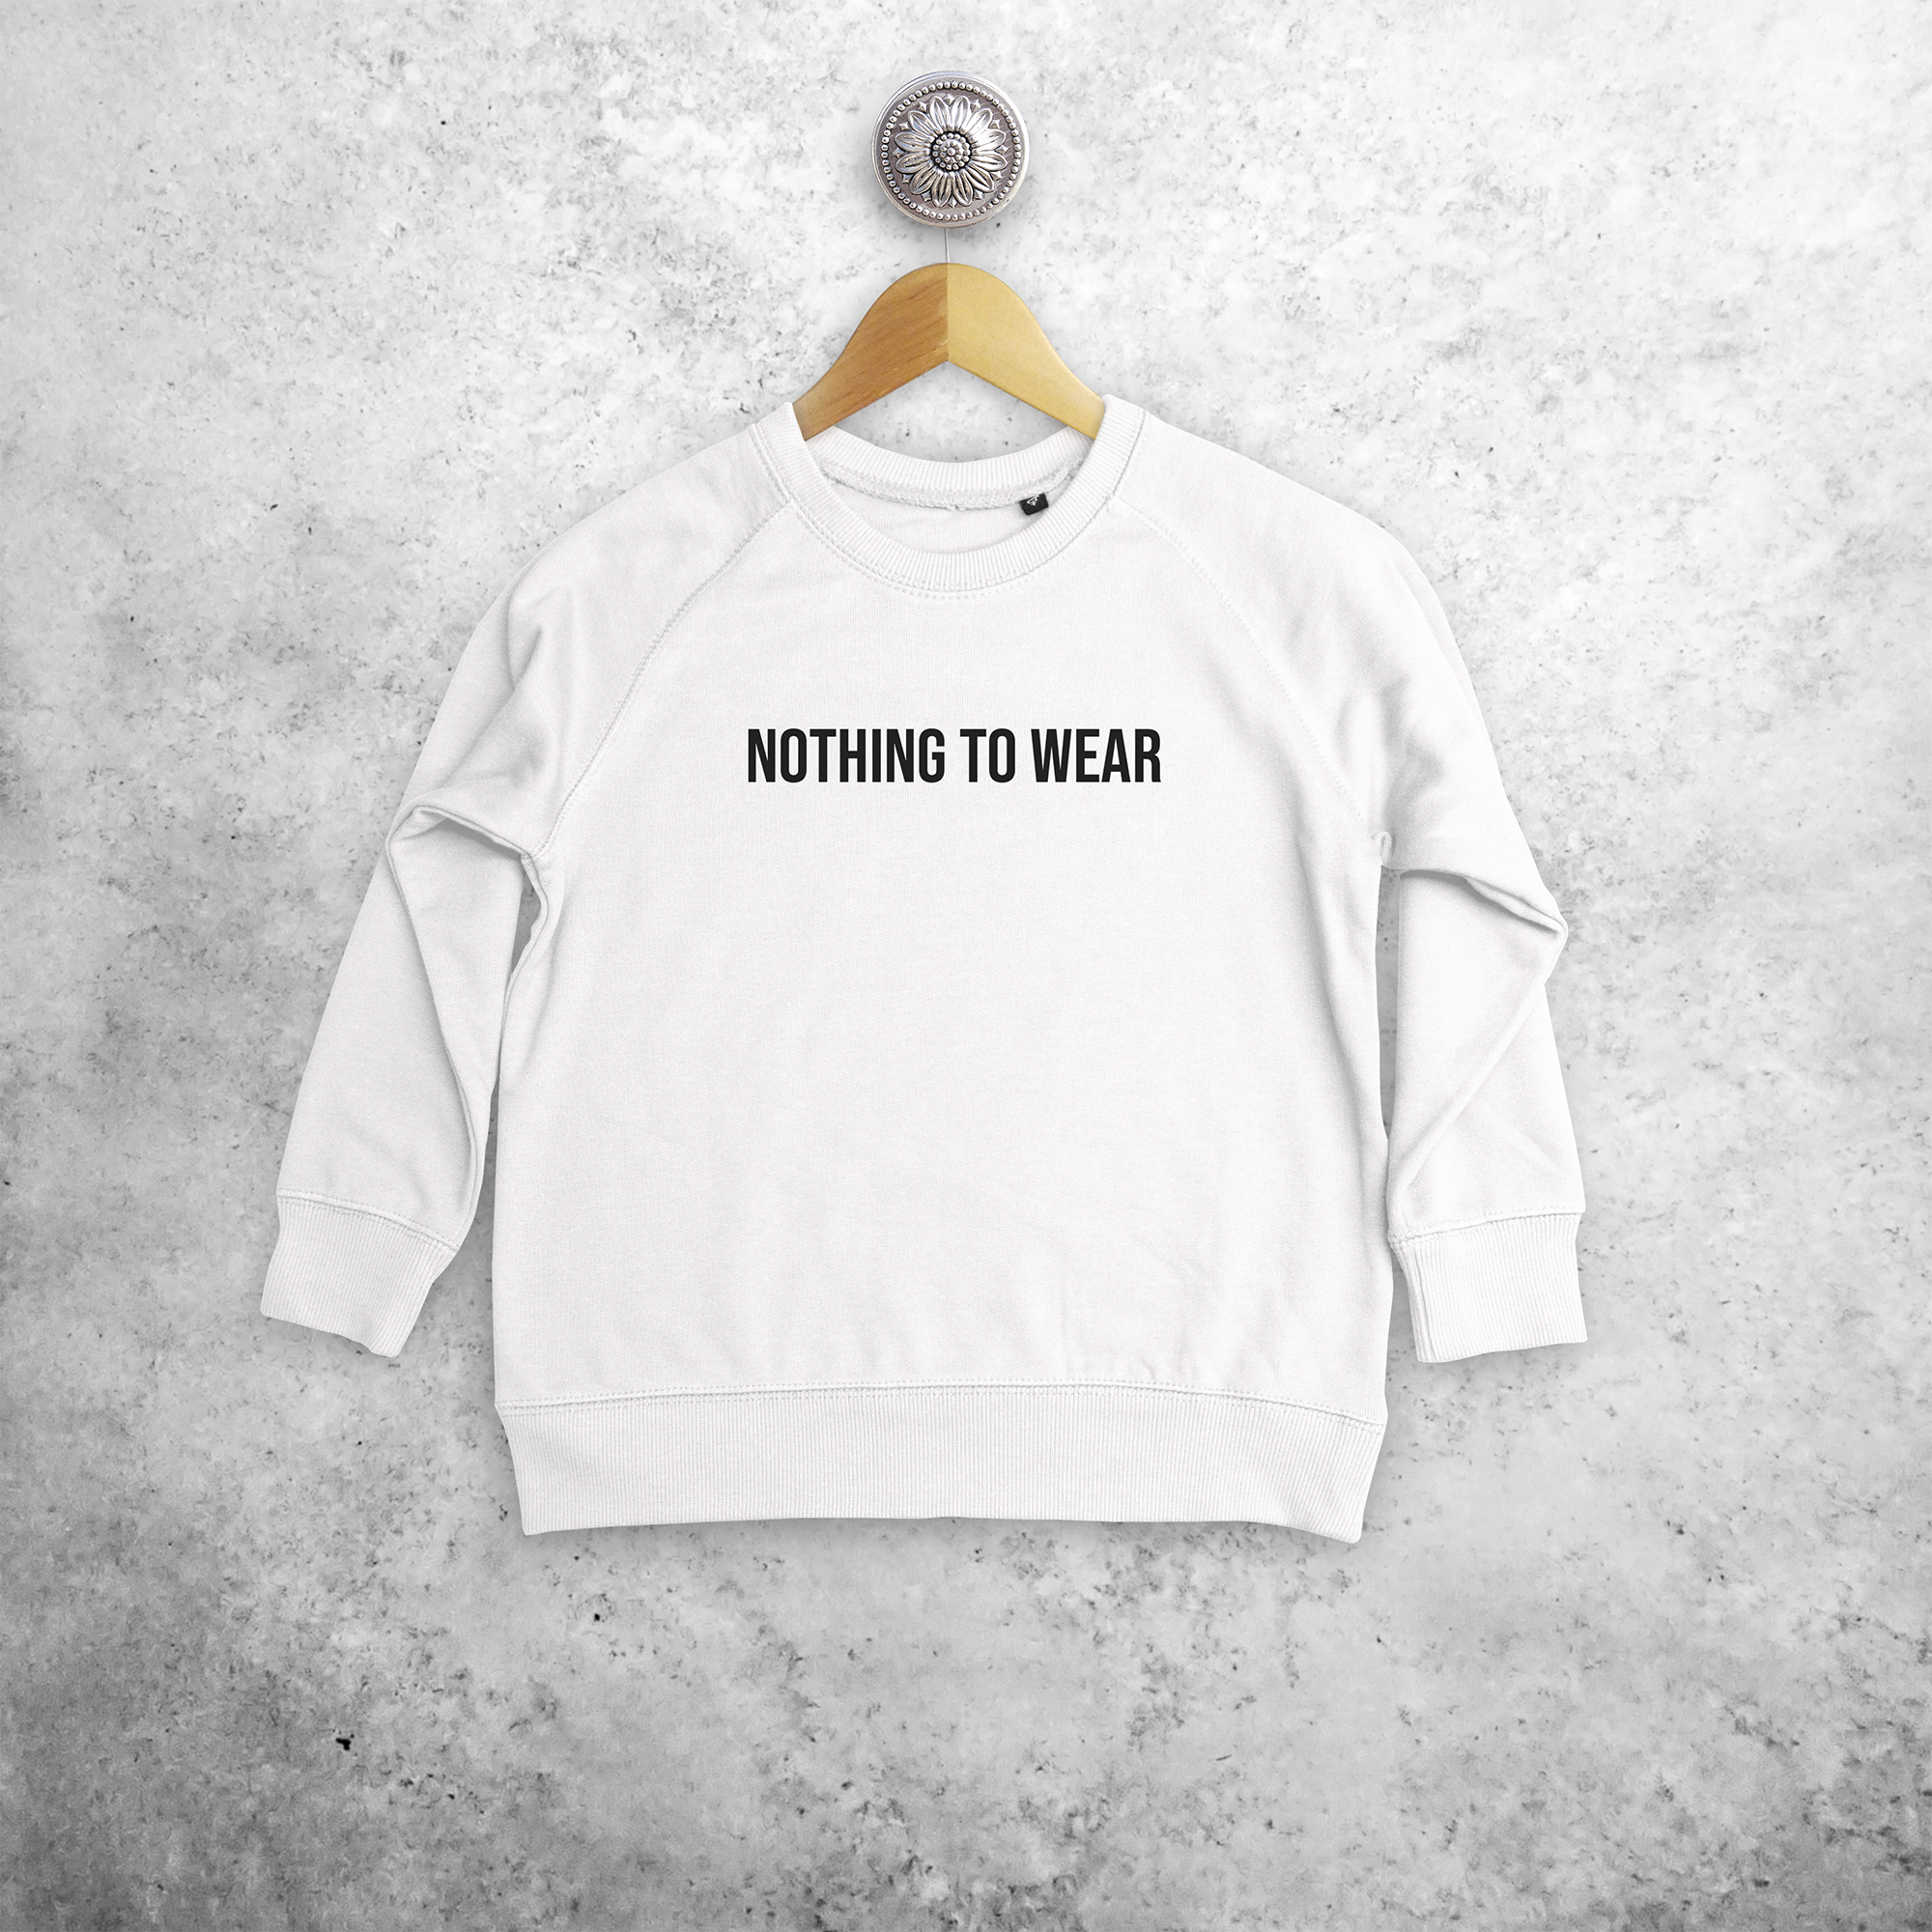 'Nothing to wear' kids sweater